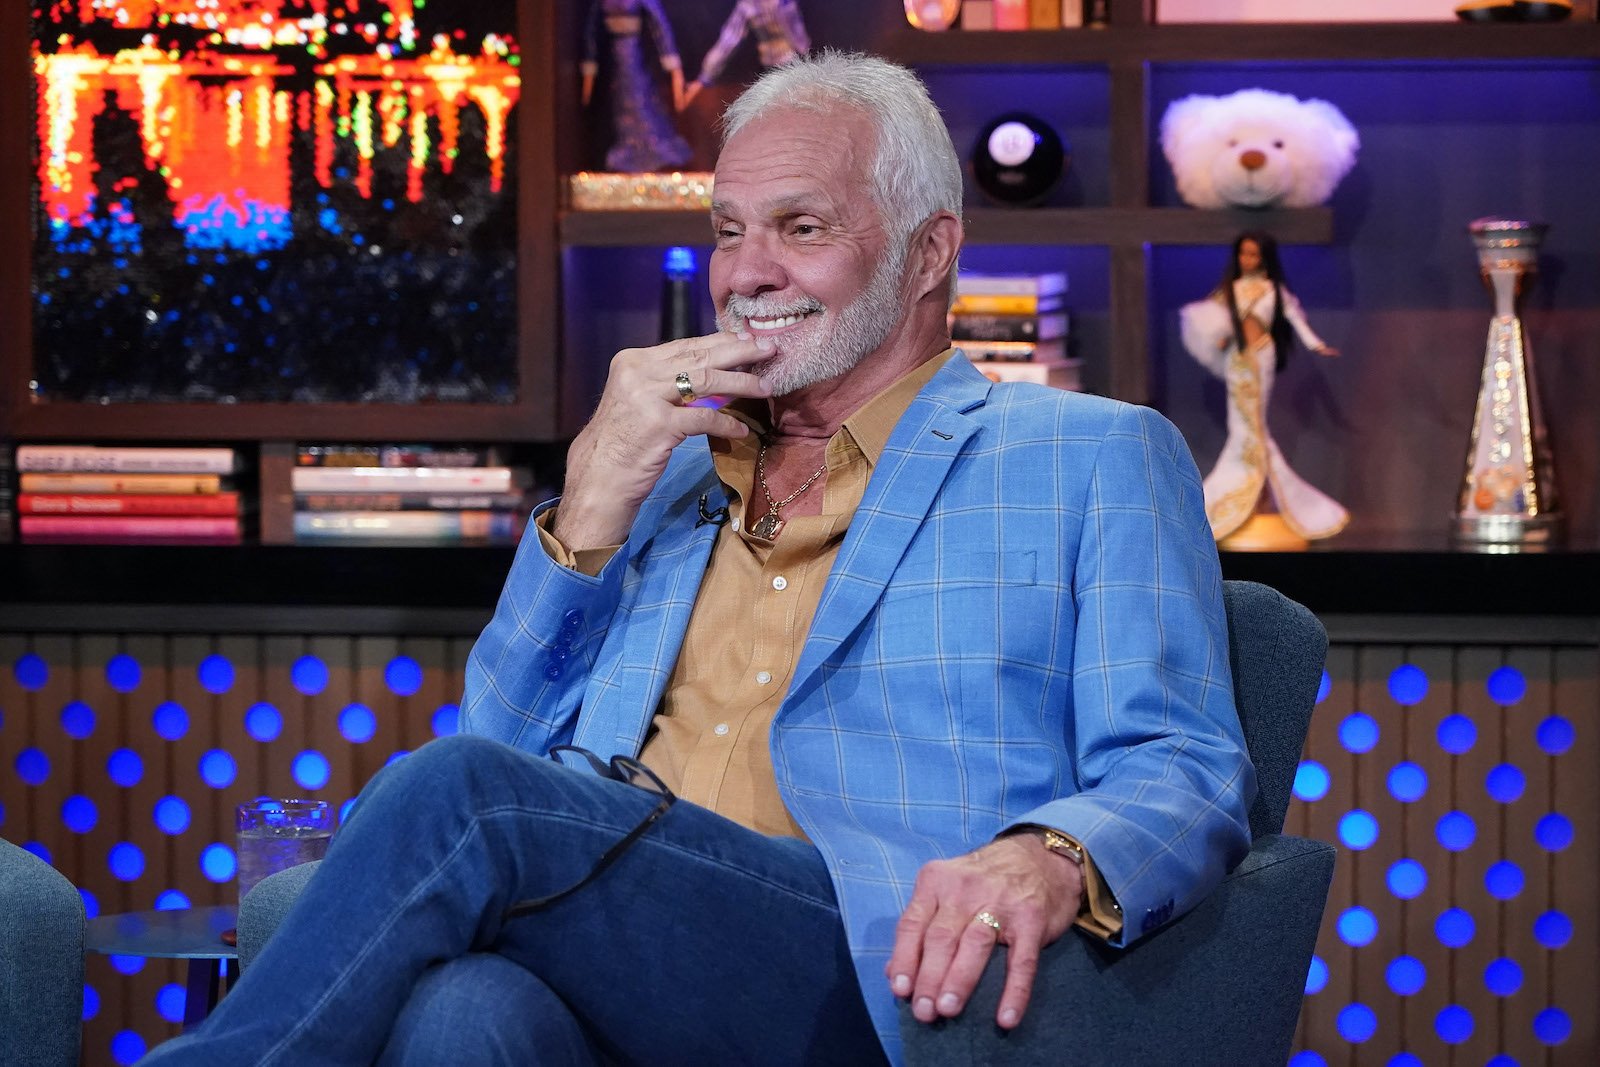 Captain Lee Rosbach from 'Below Deck' visits 'WWHL' and smiles in his seat.